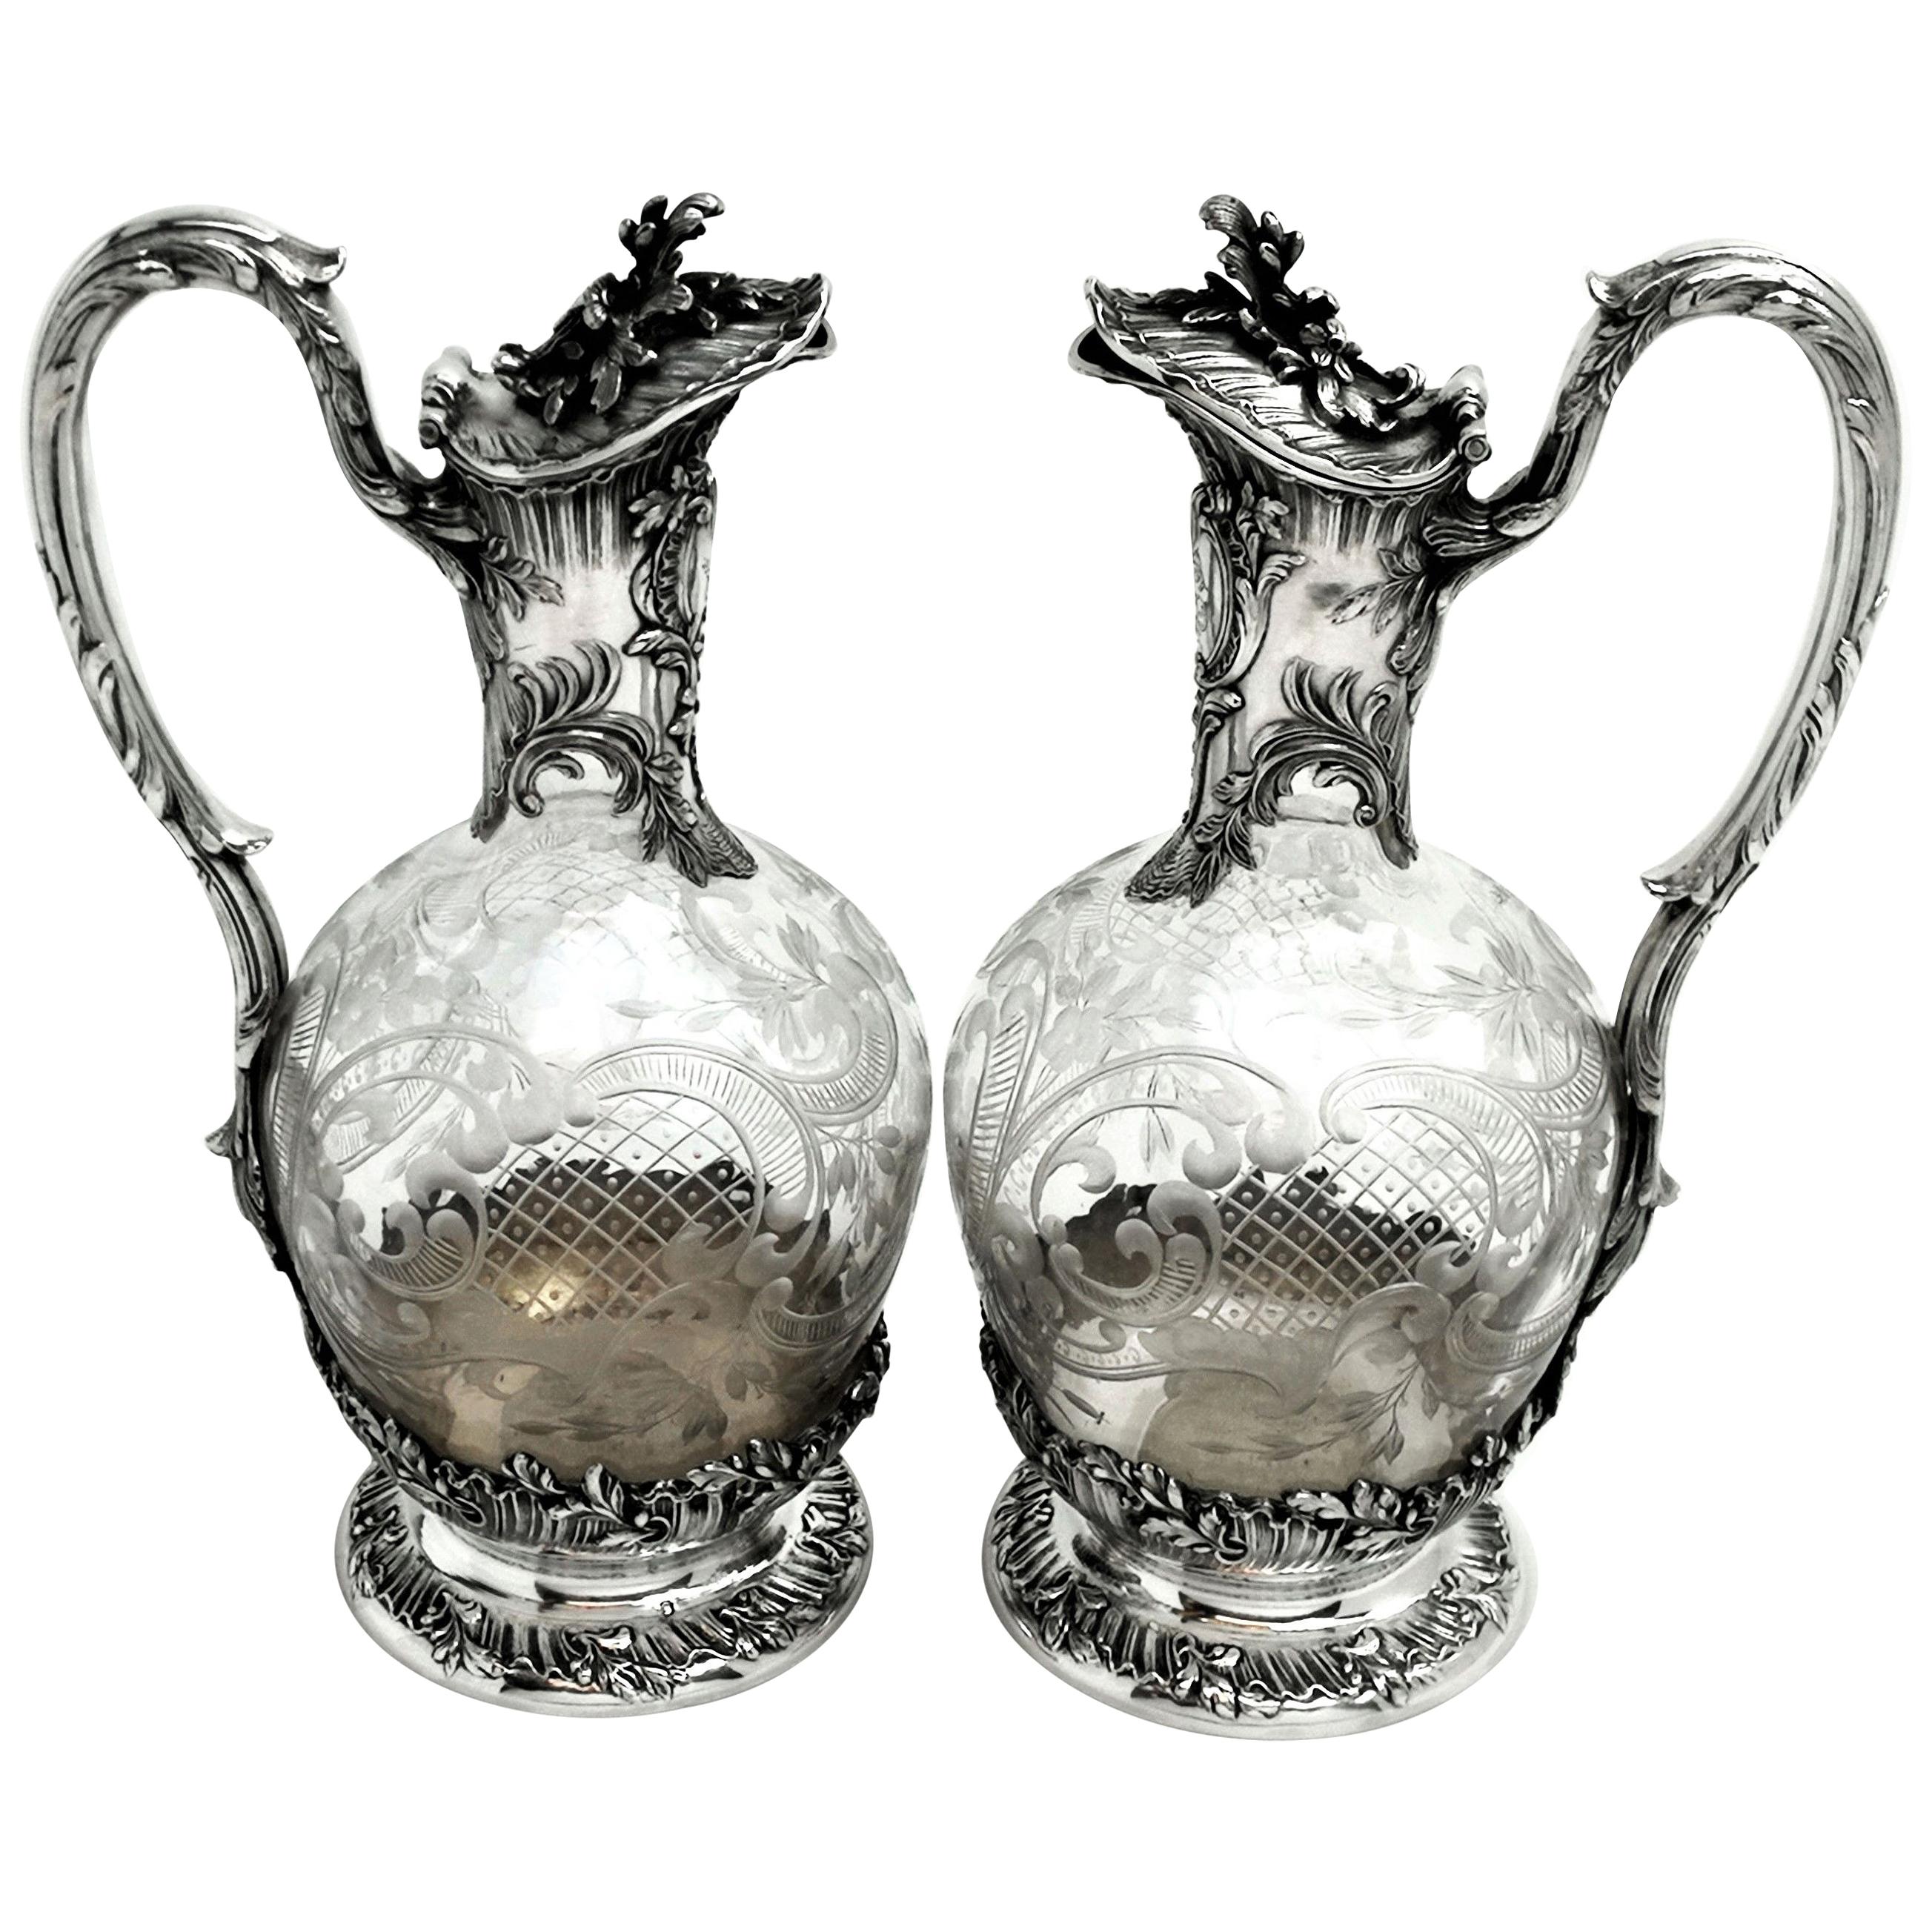 Pair French Antique Solid Silver and Glass Claret Jugs / Wine Decanters c. 1890